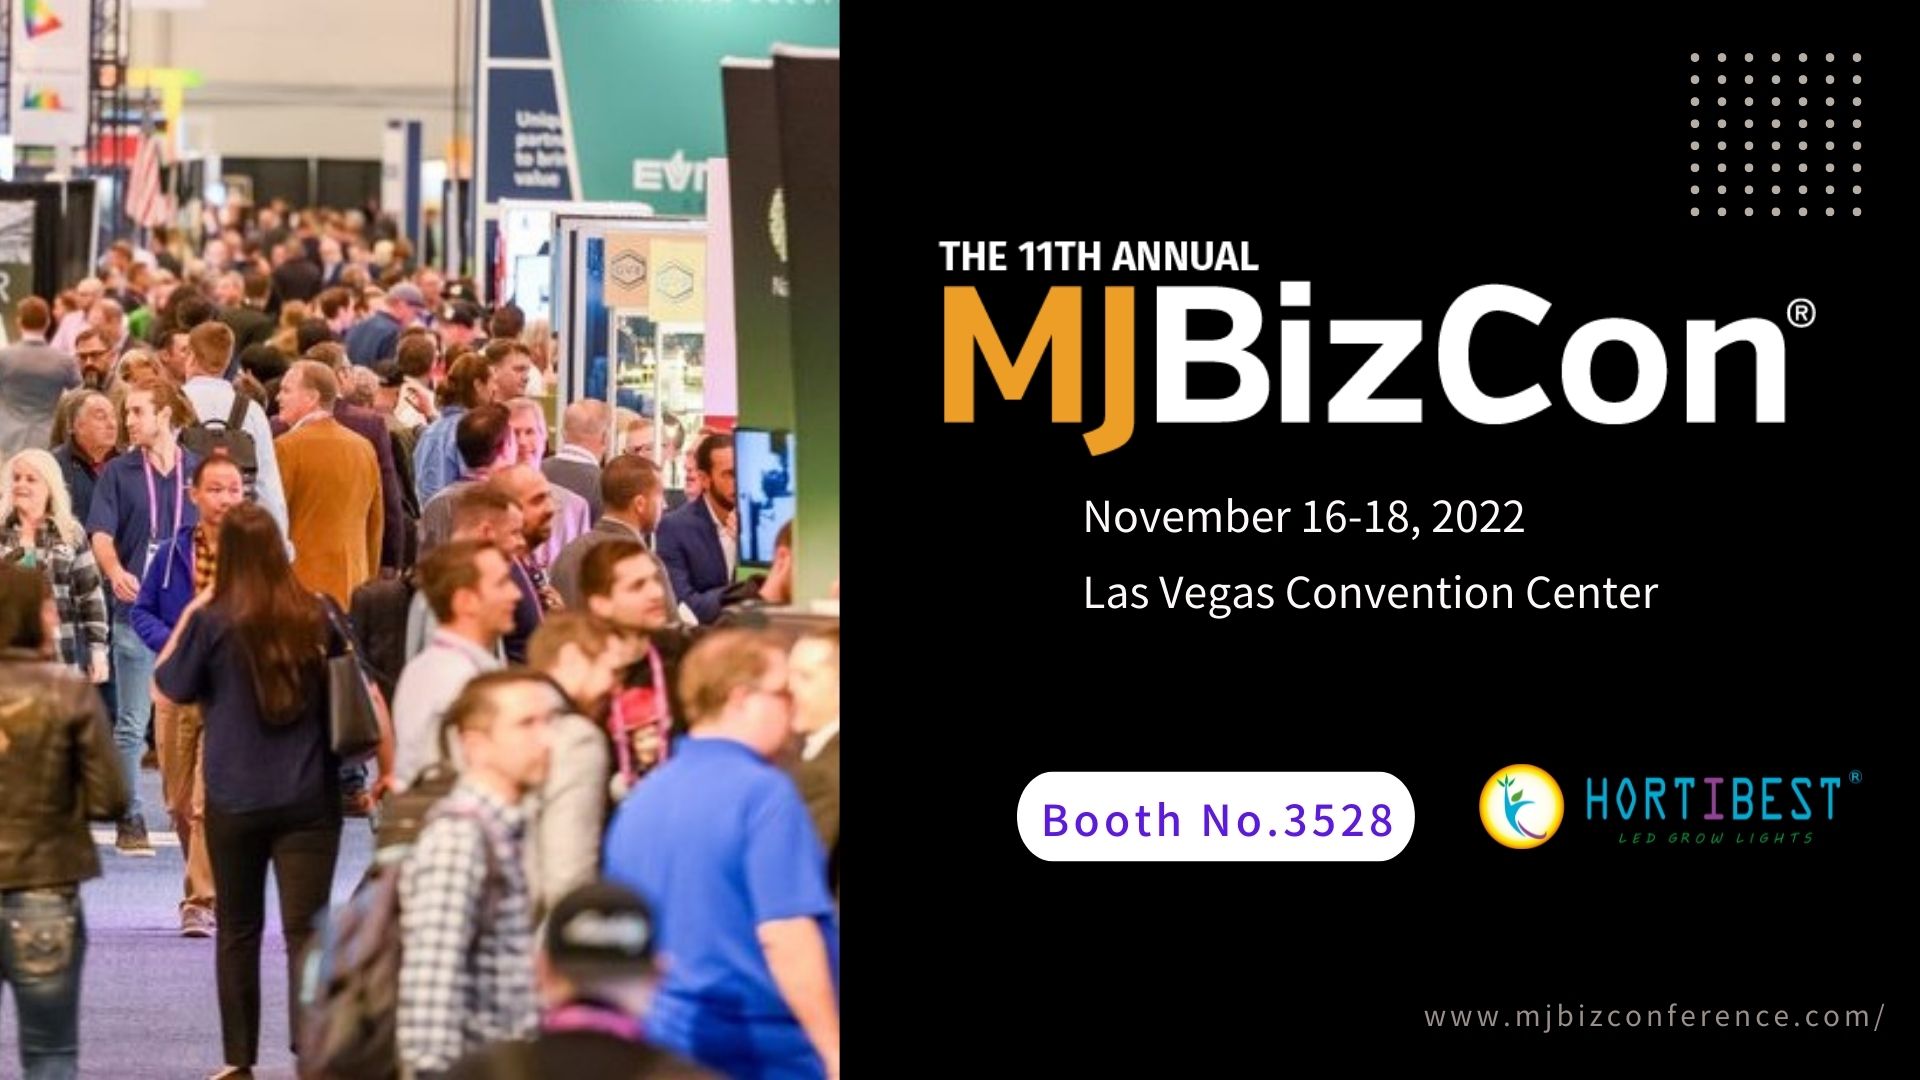 Welcome to the 11th Annual MJBizCon!